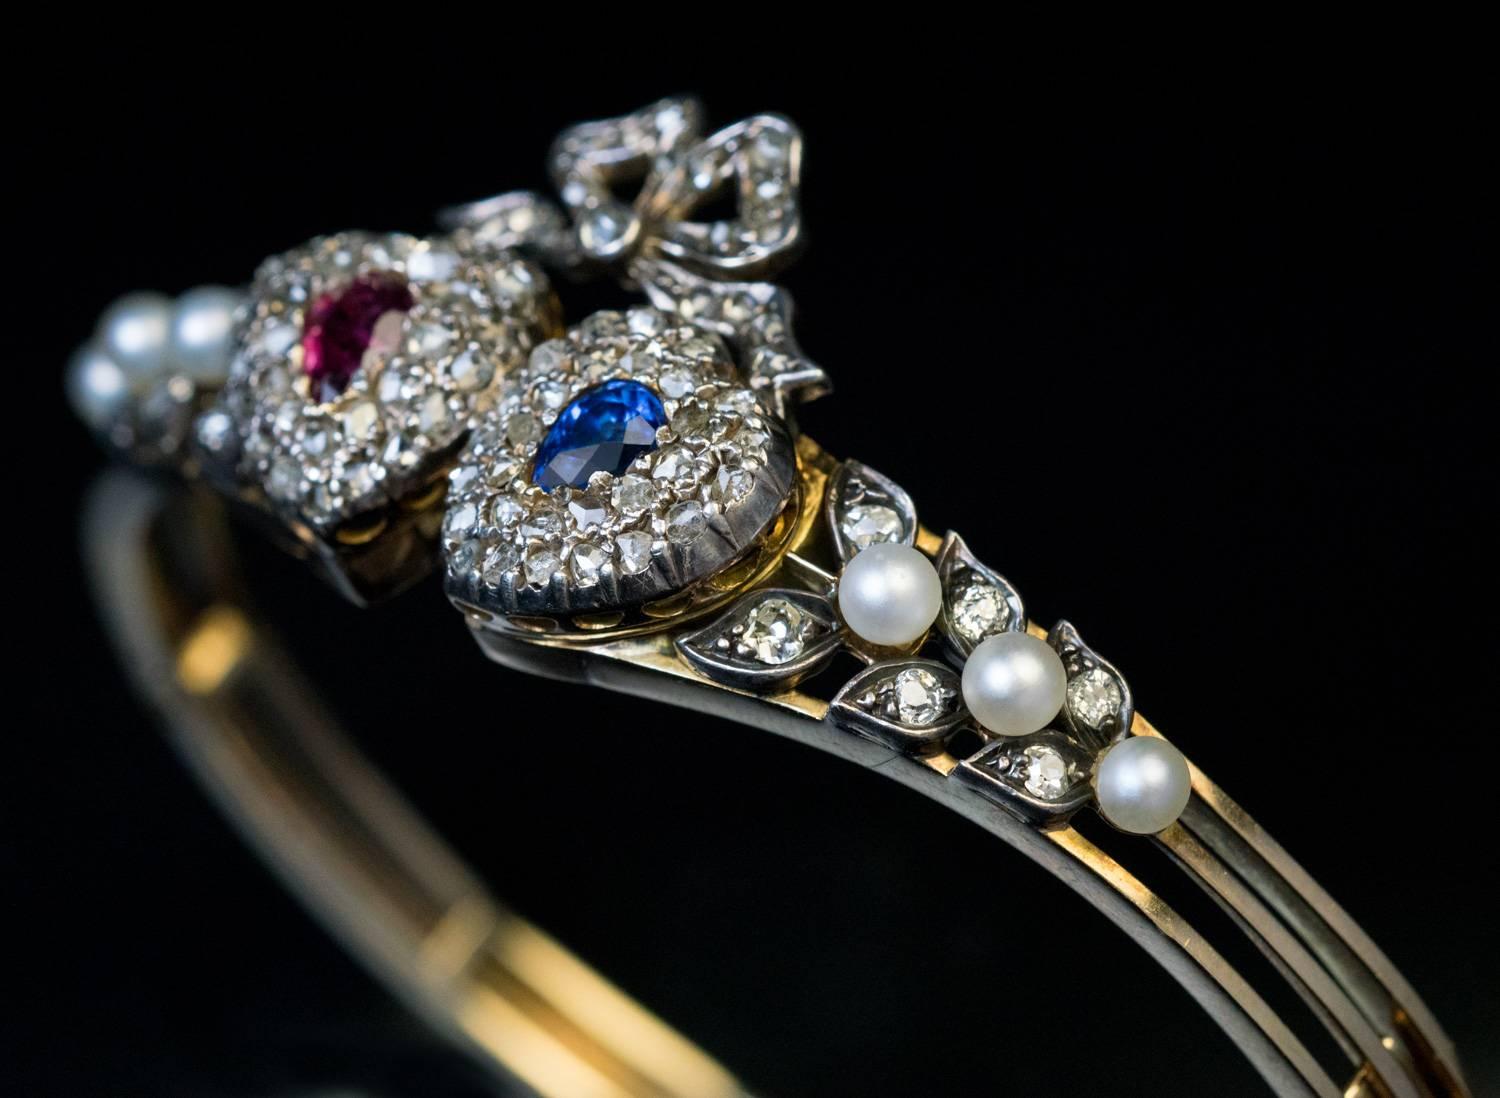 Circa 1880s

An antique 14K gold bangle bracelet is centered with two silver hearts set with a pear shape ruby and a blue sapphire (approximately 0.30 ct and 0.35 ct) surrounded by rose cut diamonds. The hearts are surmounted by a diamonds bow and